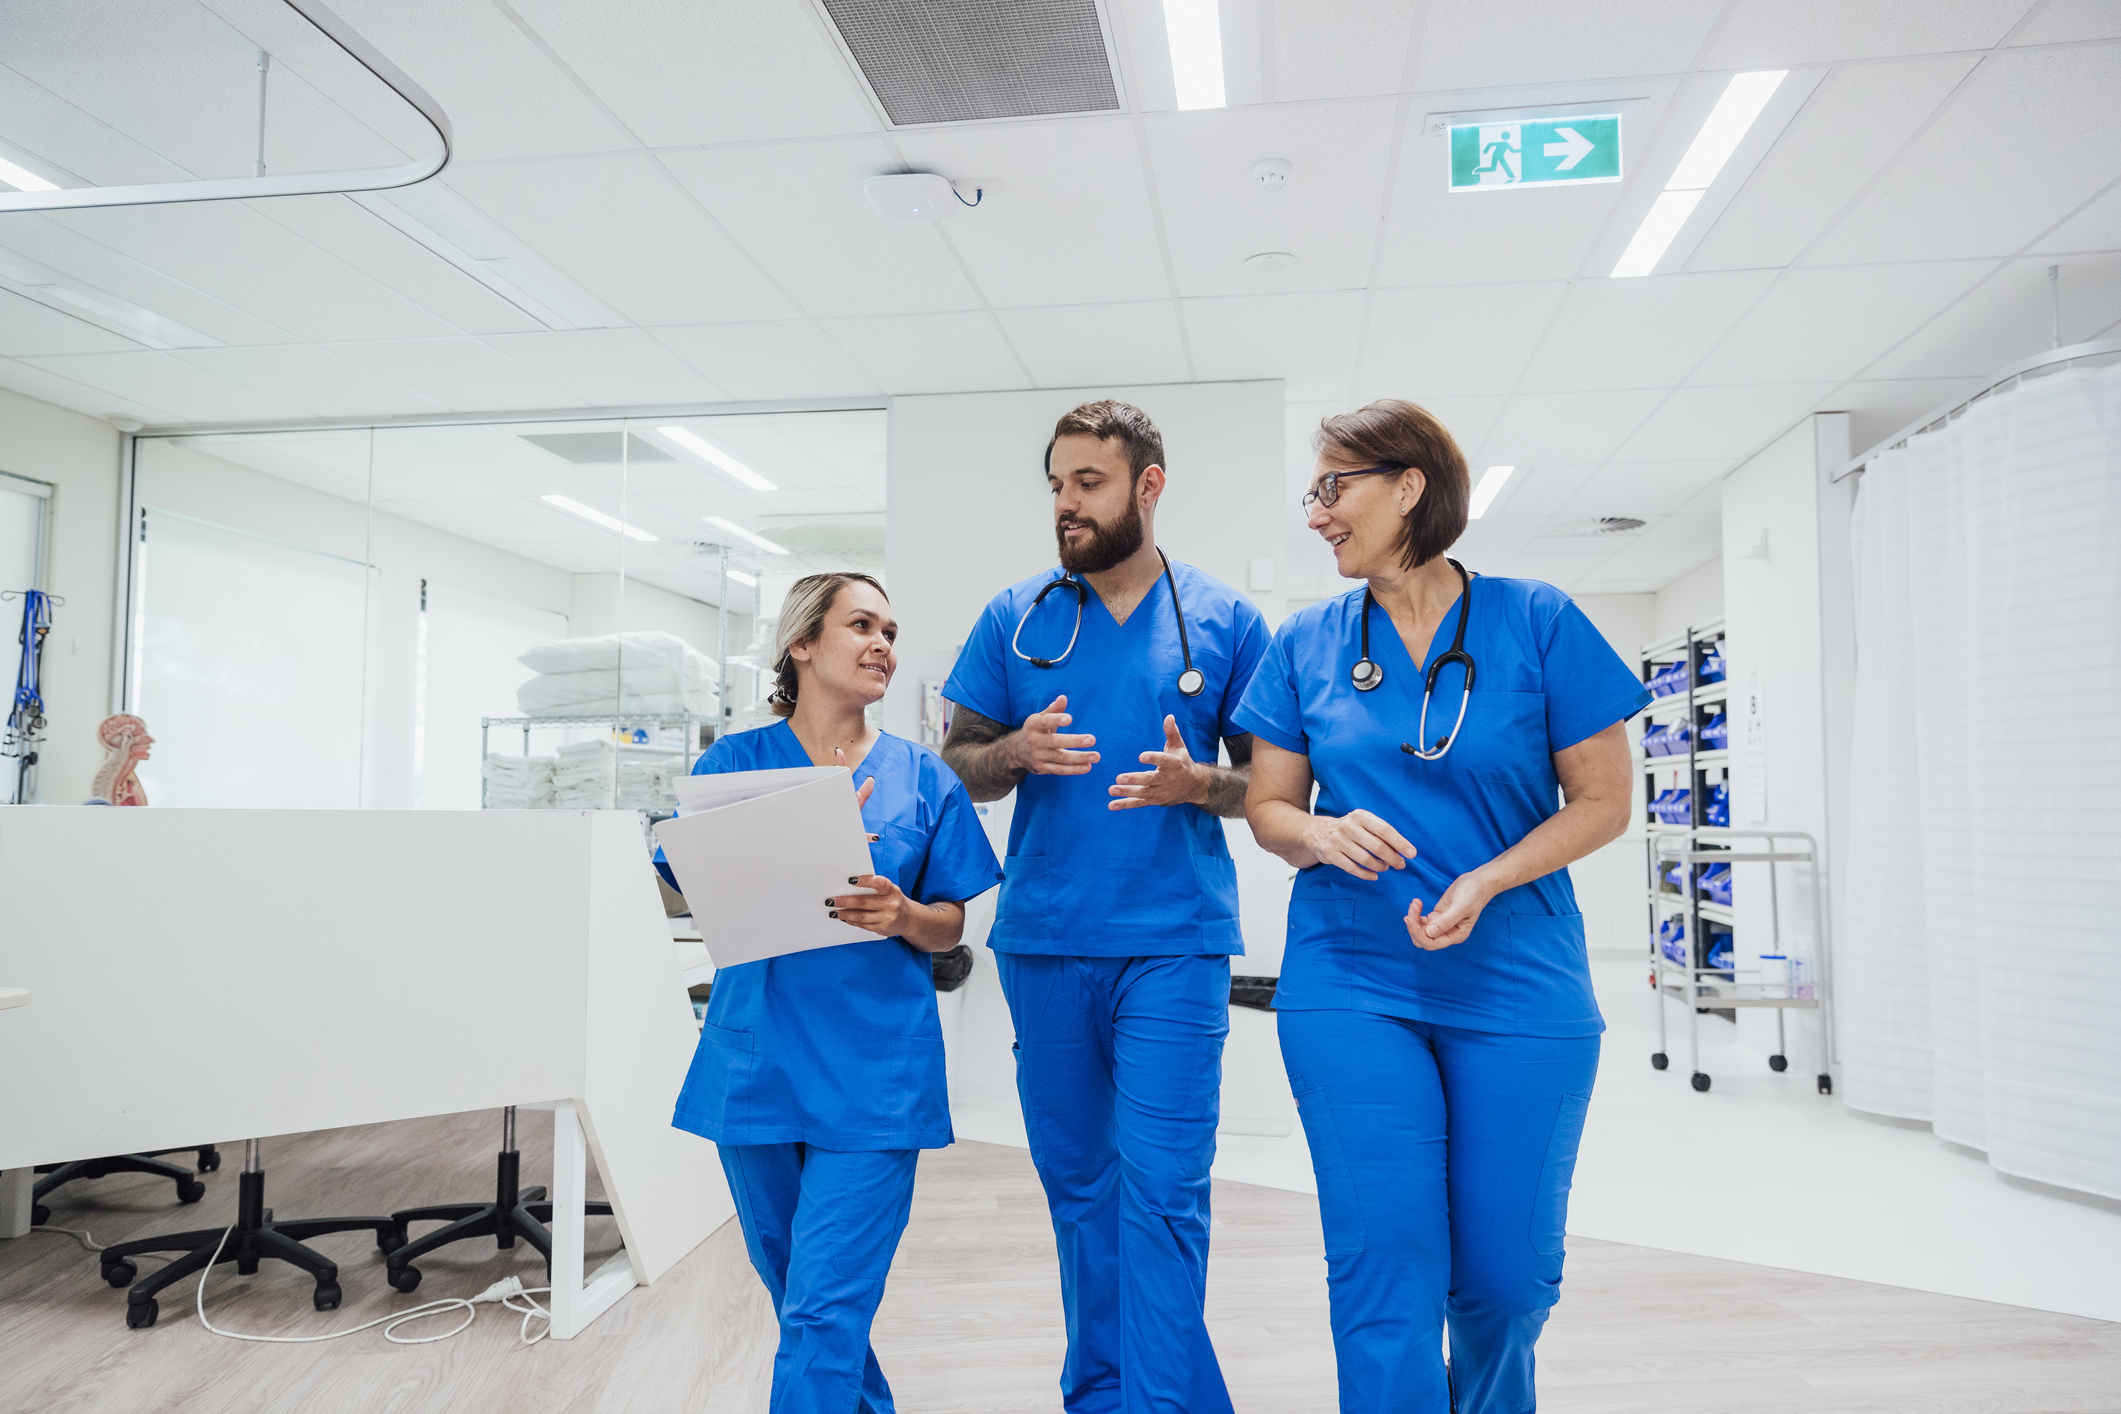 Three nurses walking and talking together in a hospital